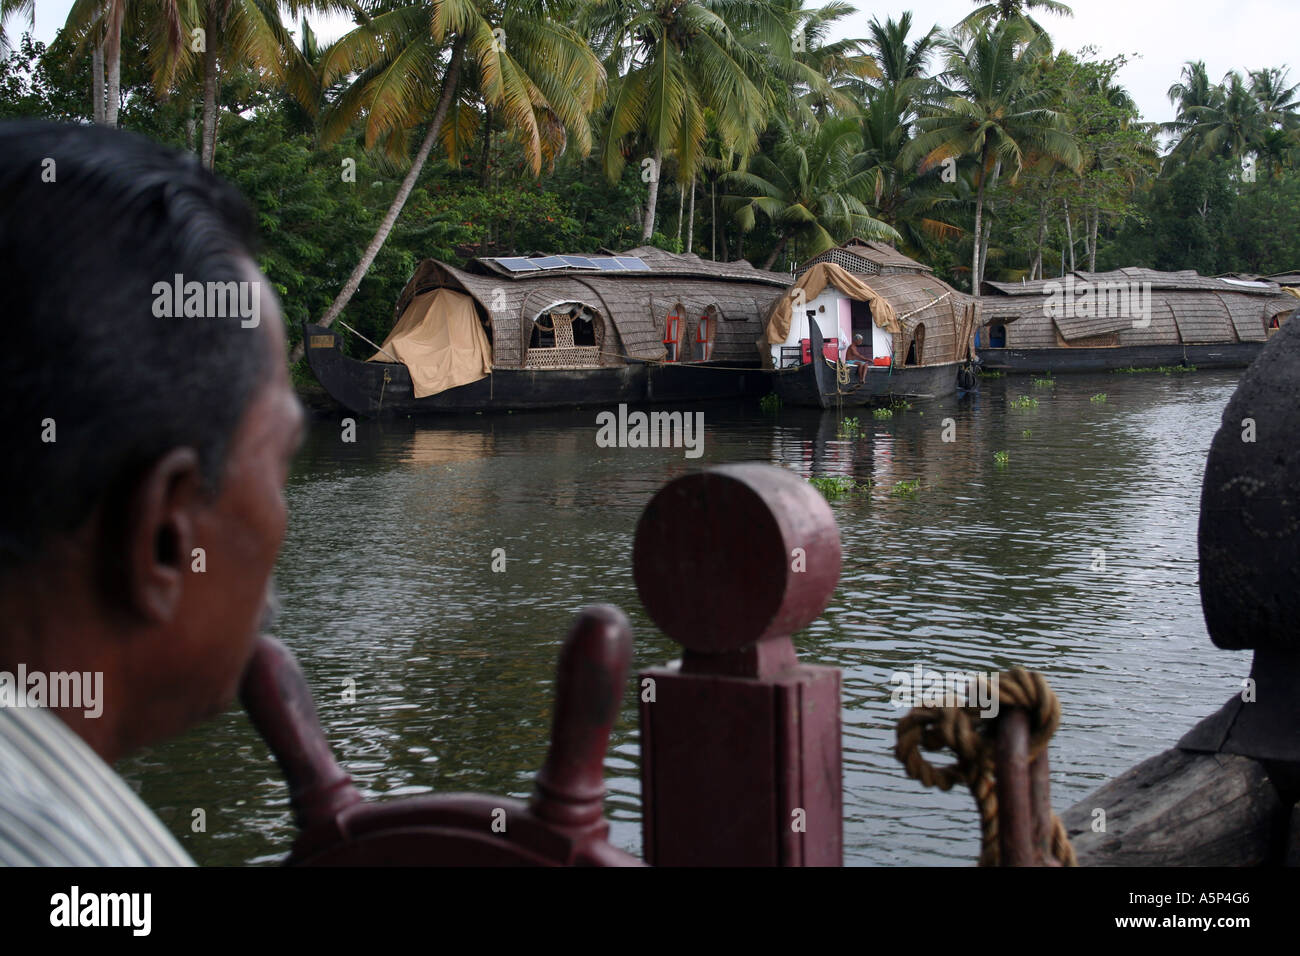 Portrait of a man steering a houseboat on the backwaters of Kerala Stock Photo